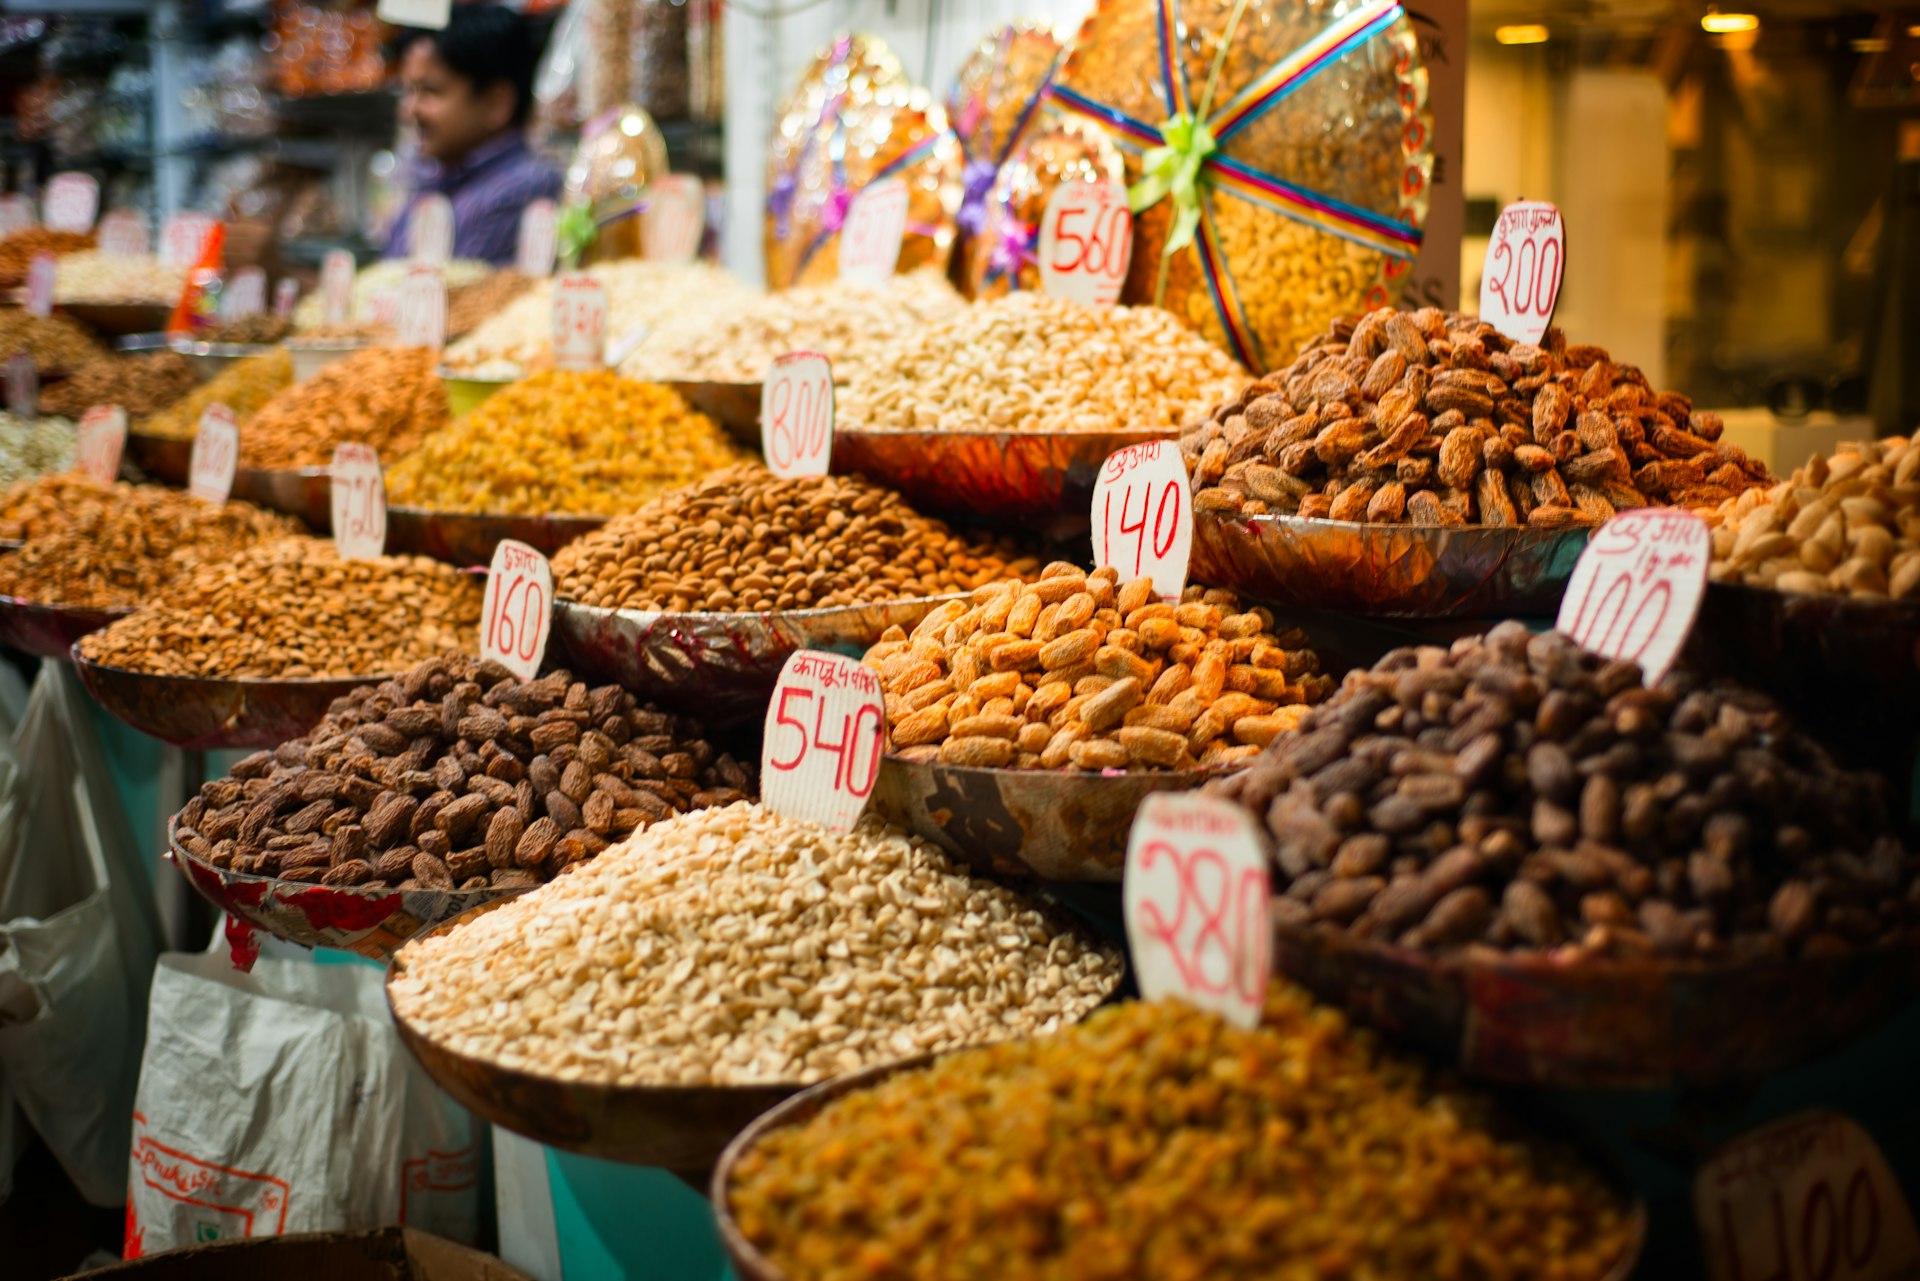 Dried fruit and nuts on display at Chandni Chowk market in Old Delhi.